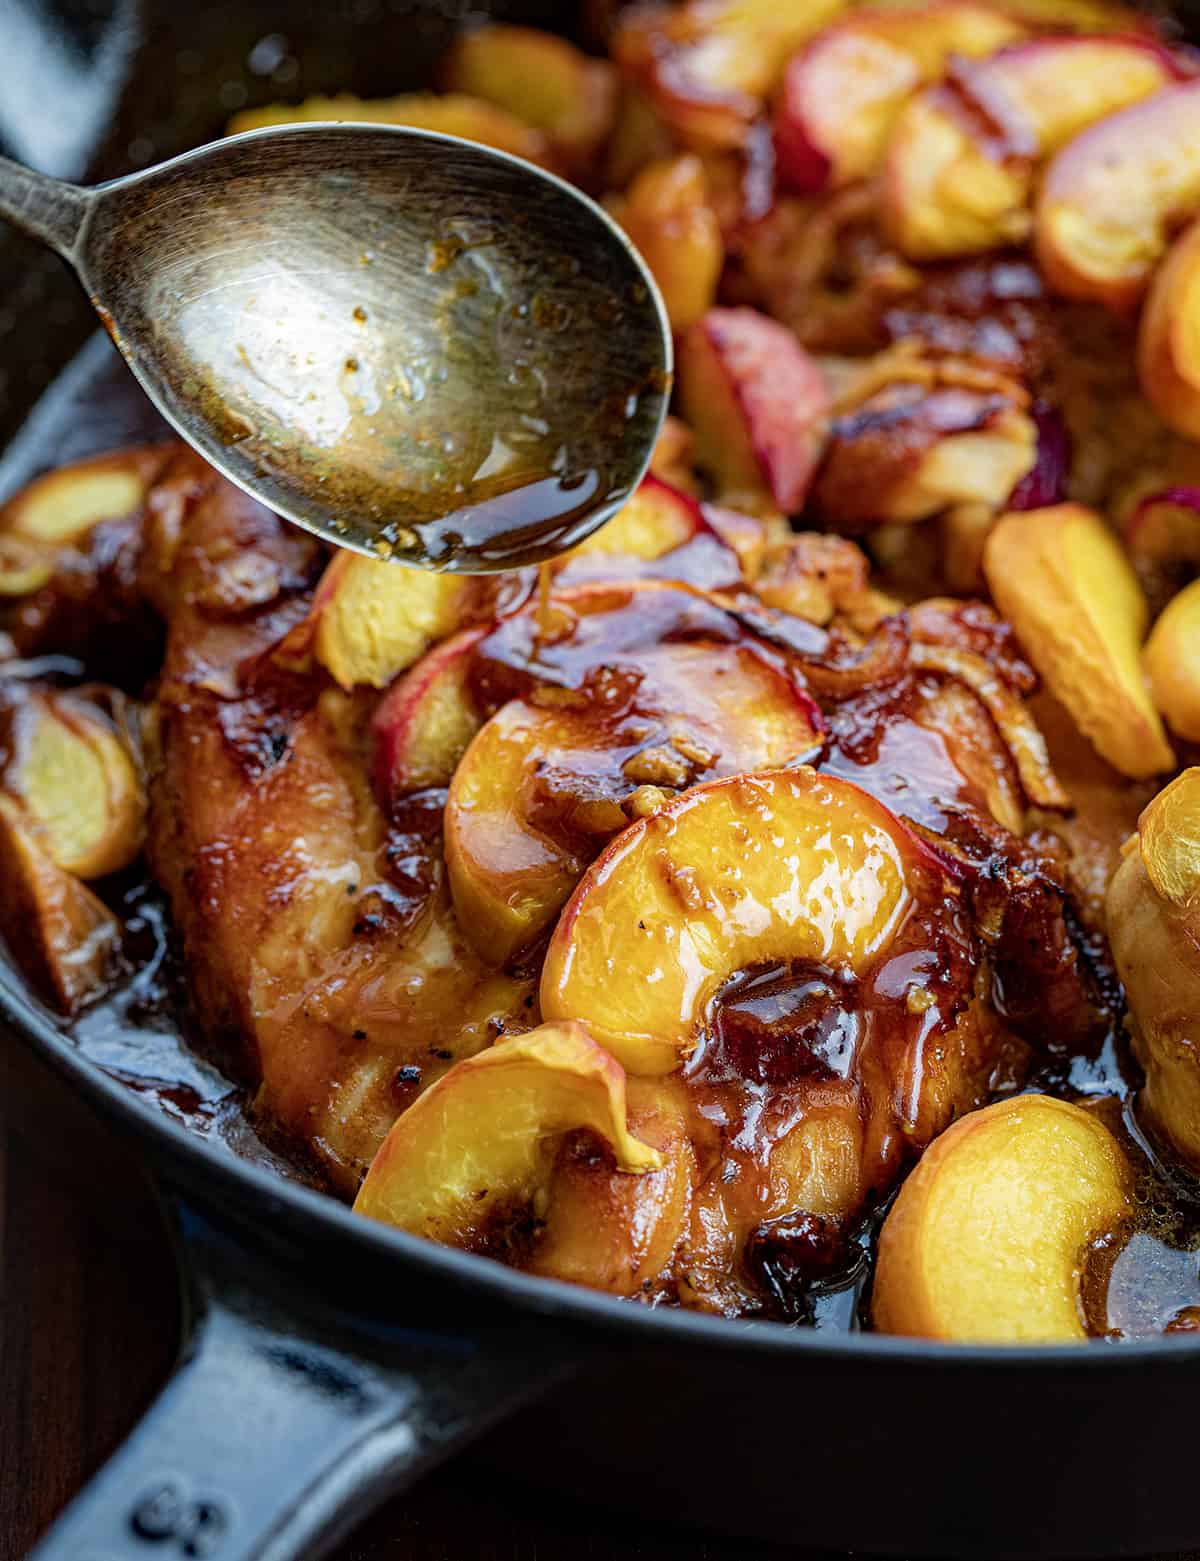 Spooning Glazed Over Roasted Peach Chicken in the Skillet.